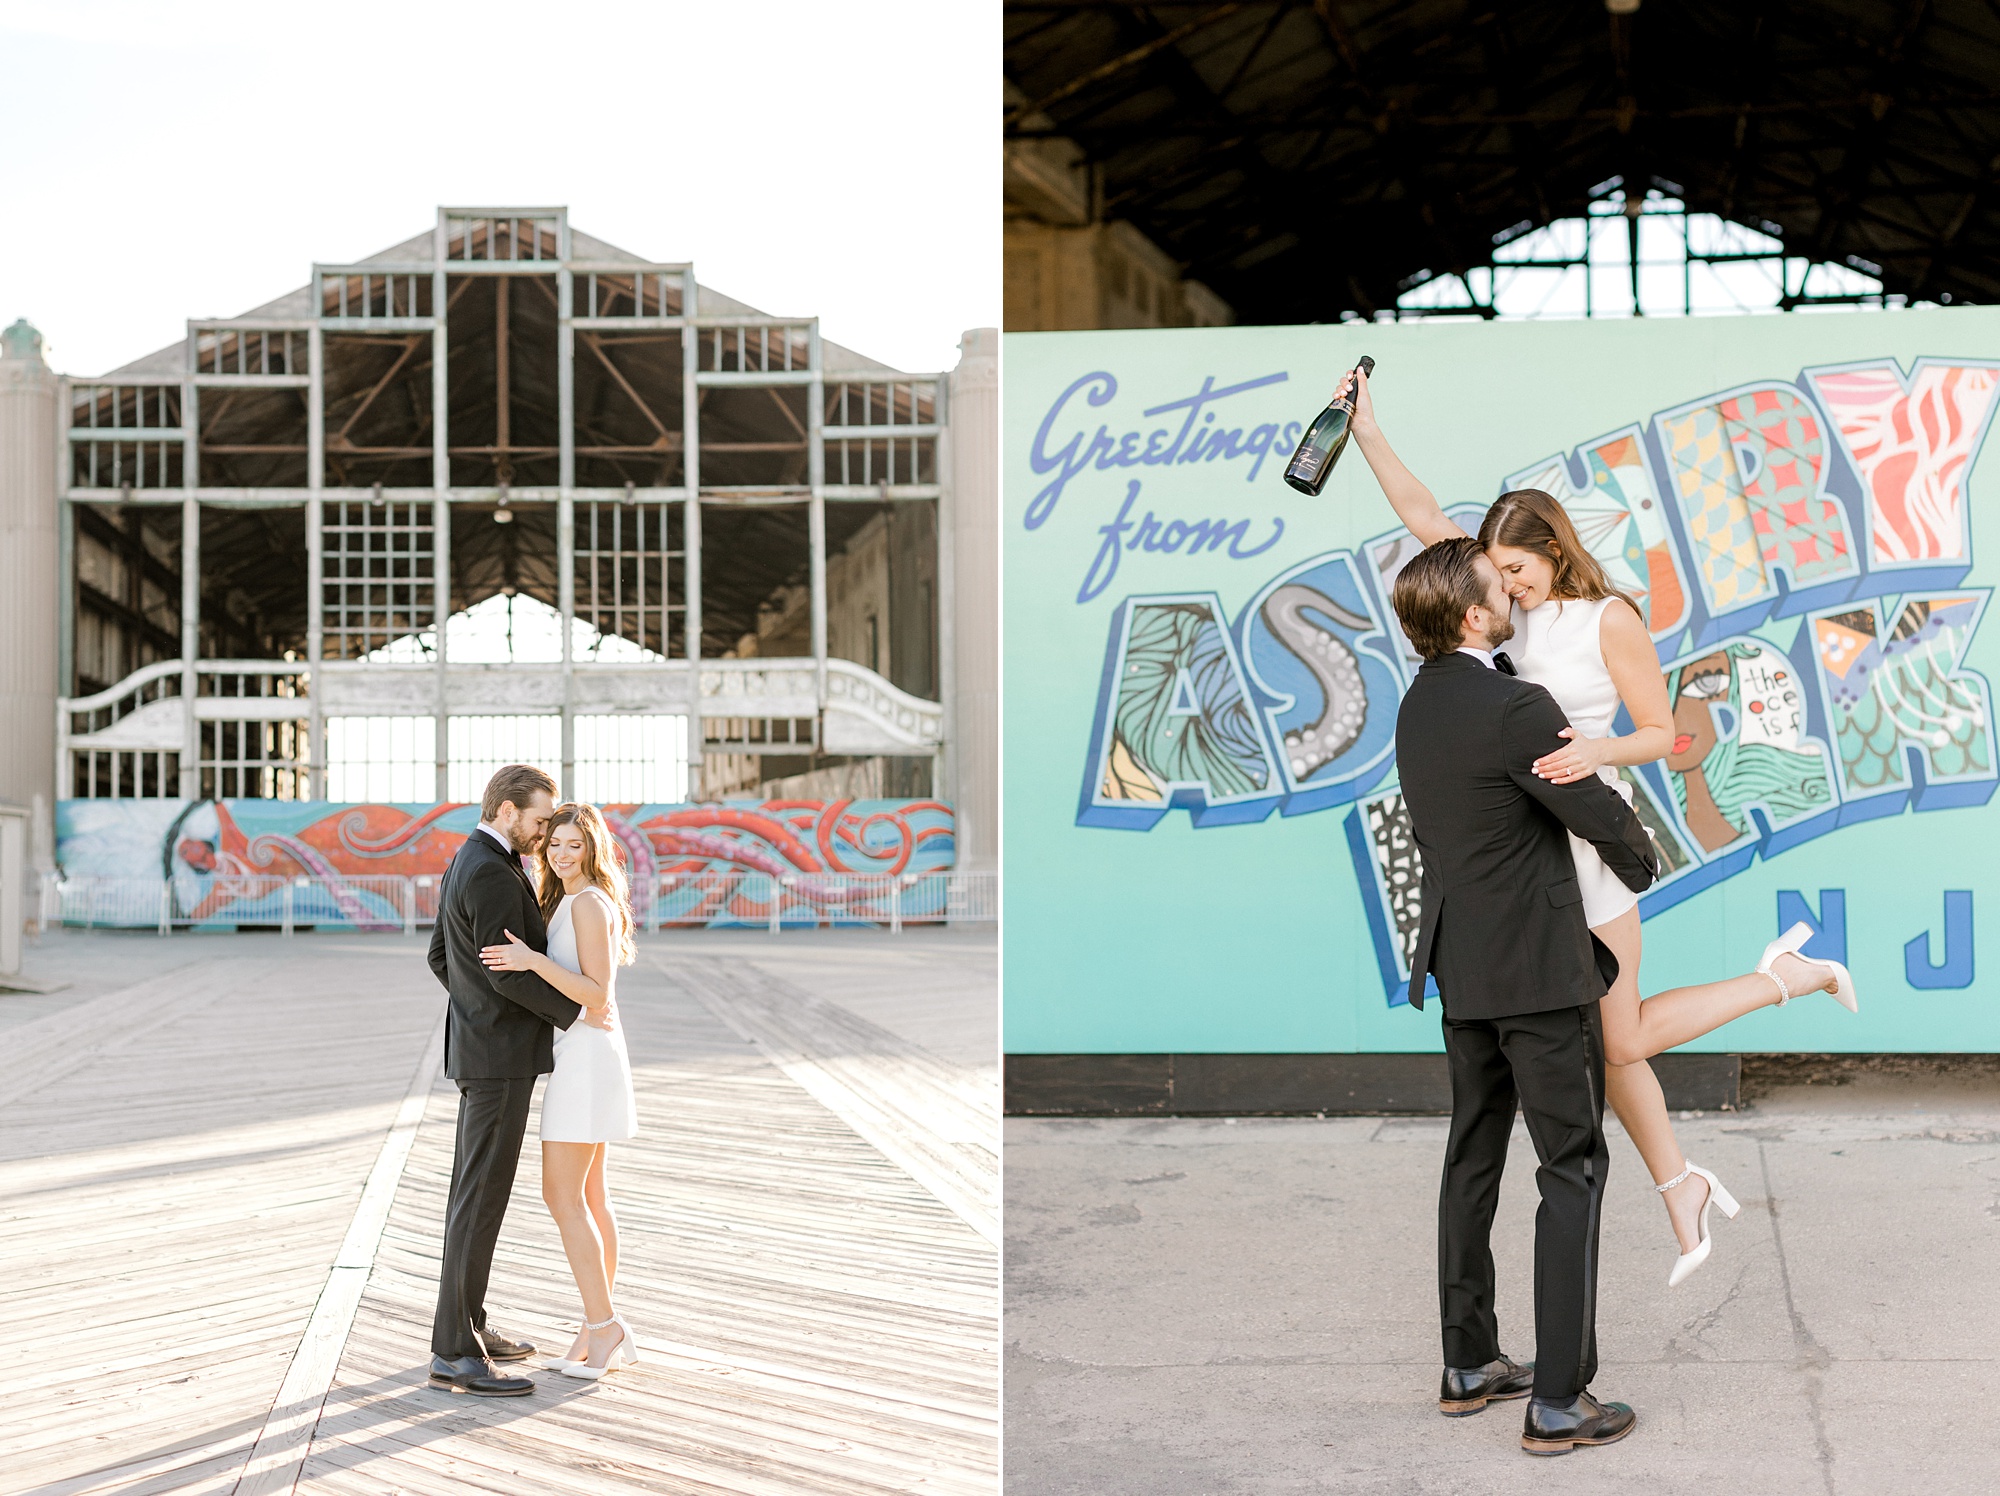 man lifts up fiancée in front of postcard sign at Asbury Park